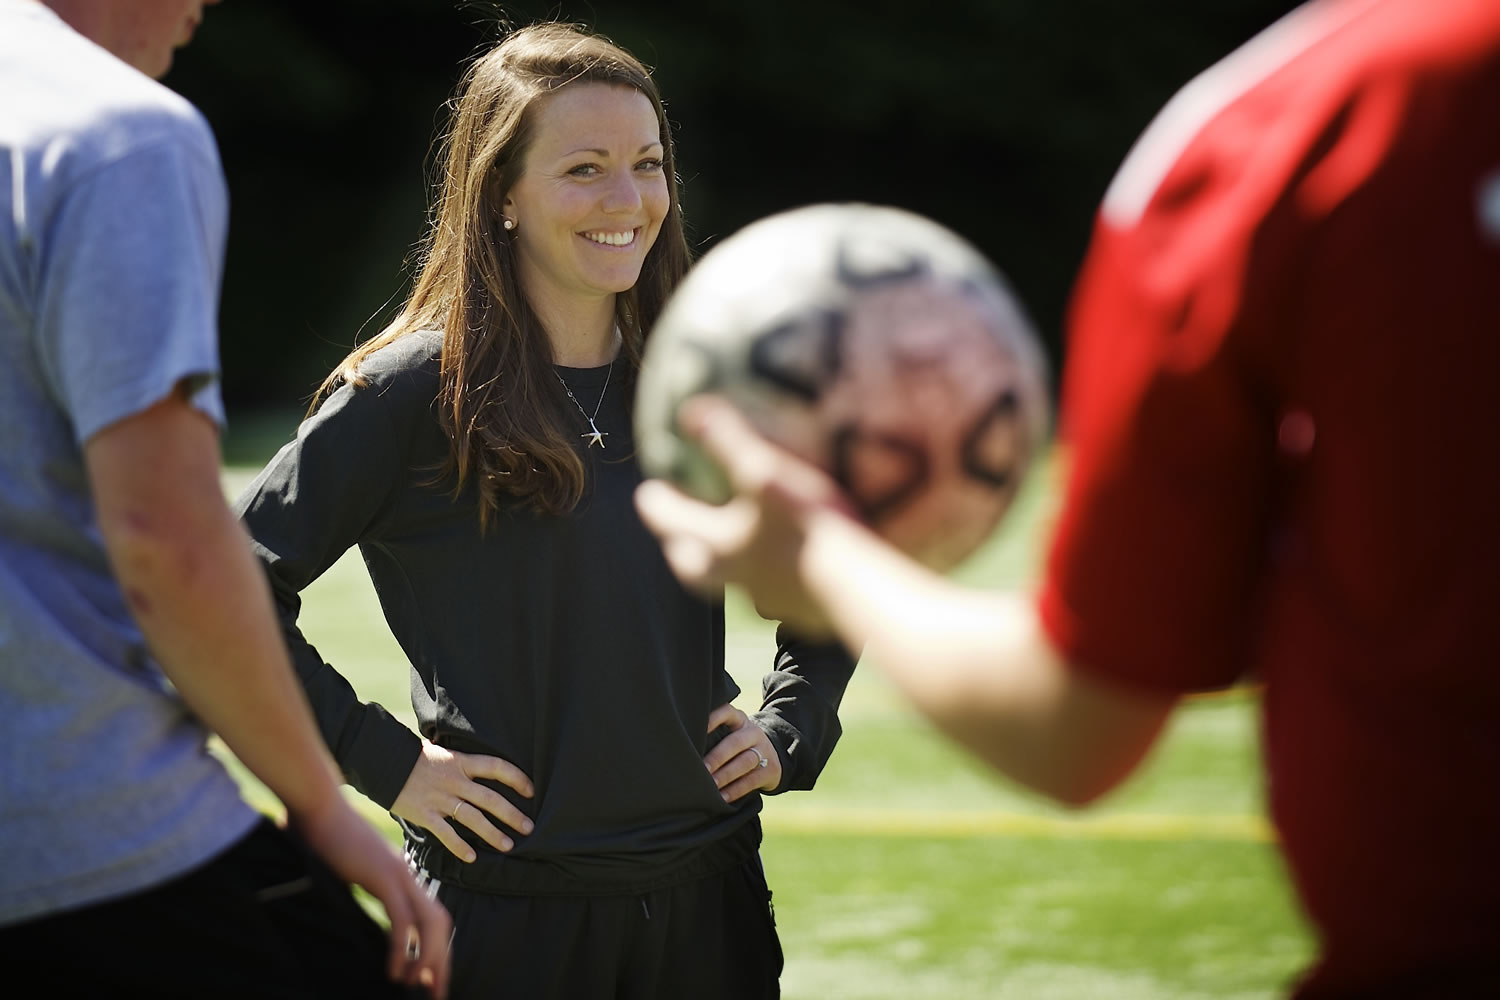 Jenn Johnson has been the head coach of the Skyview High School boys soccer team for three seasons, leading the Storm to the state semifinals.